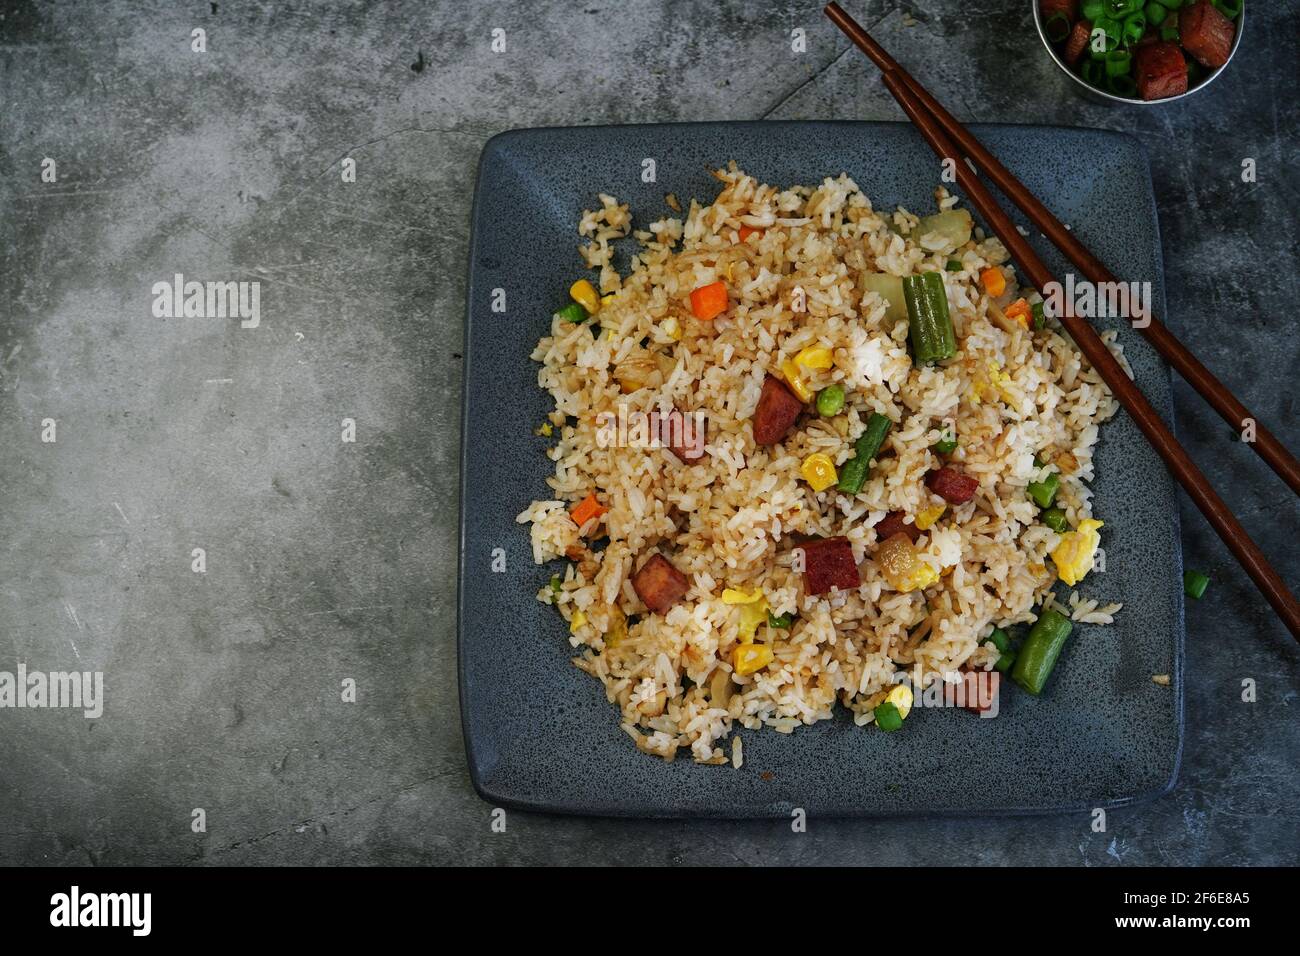 Homemade Spam Fried Rice selective focus Stock Photo